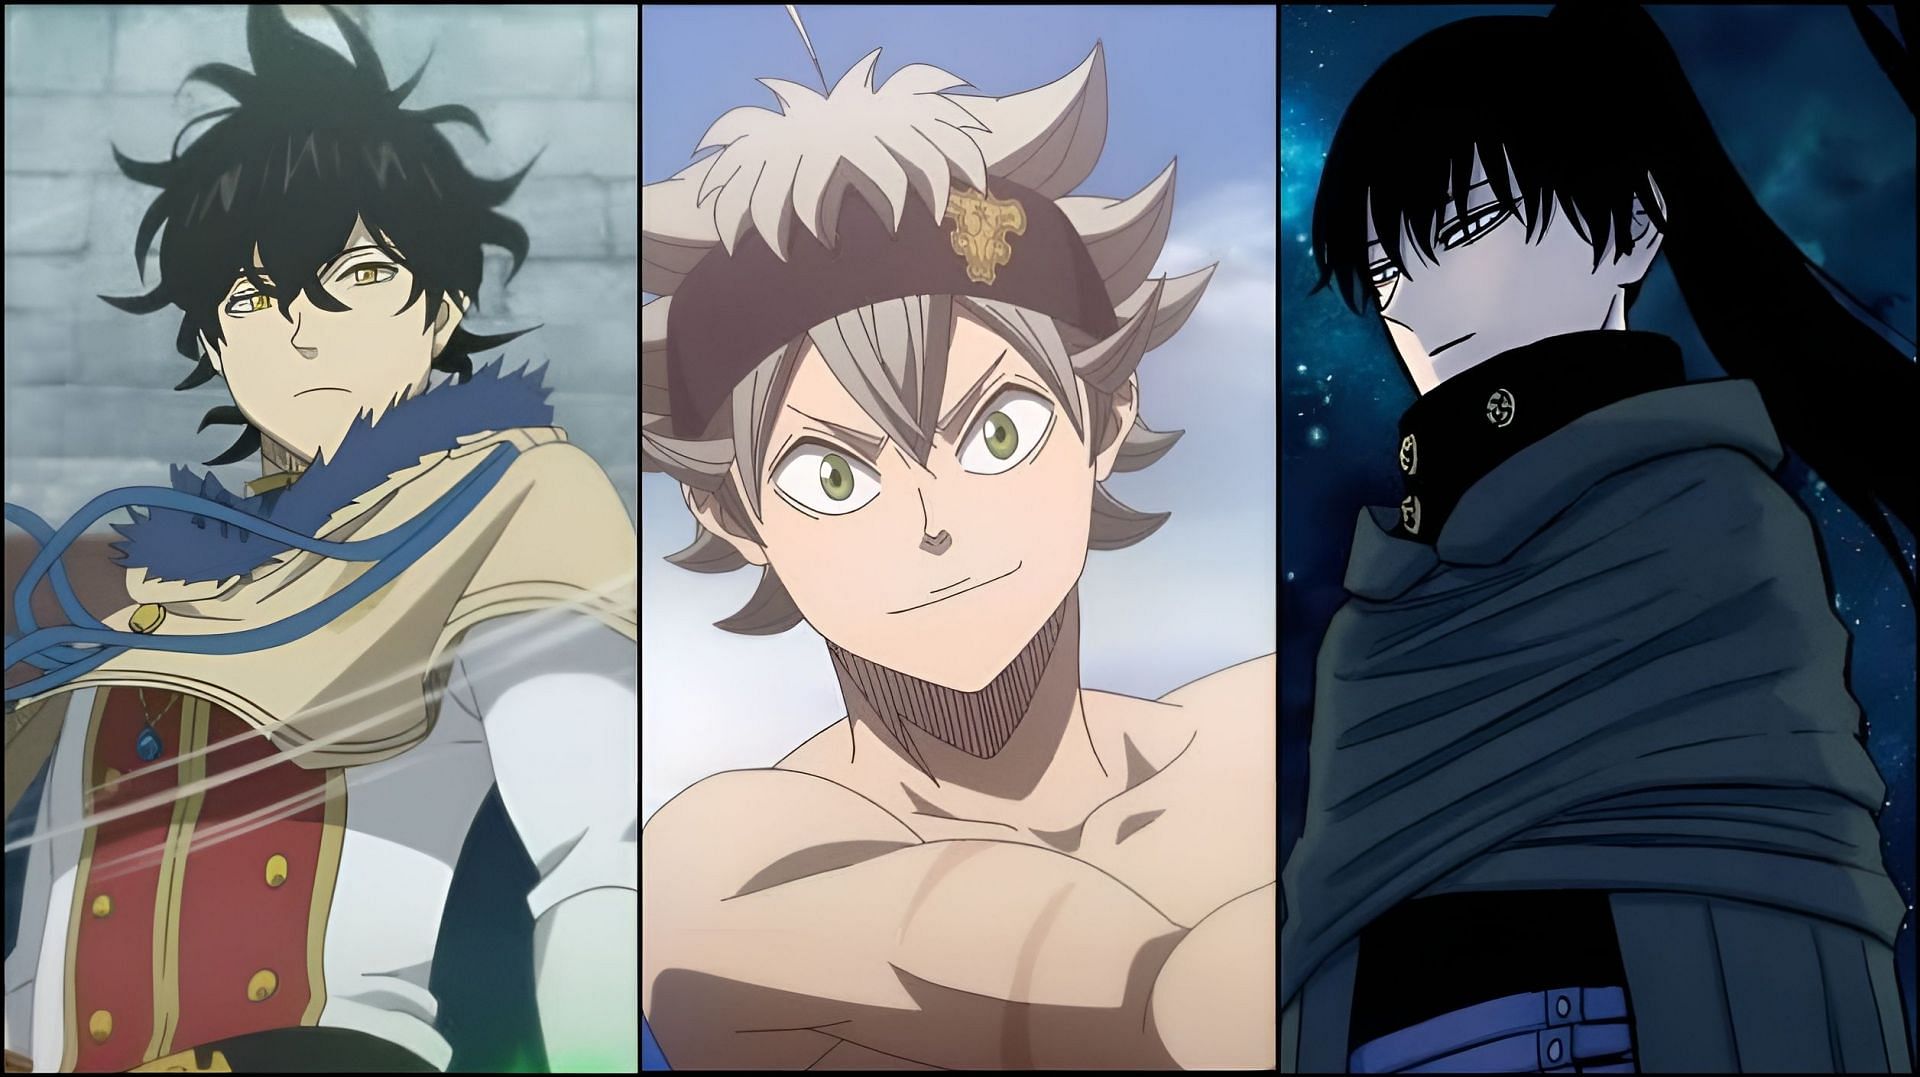 ⭐️ BLACK CLOVER ⭐️ Synopsis Asta and Yuno were abandoned at the same c